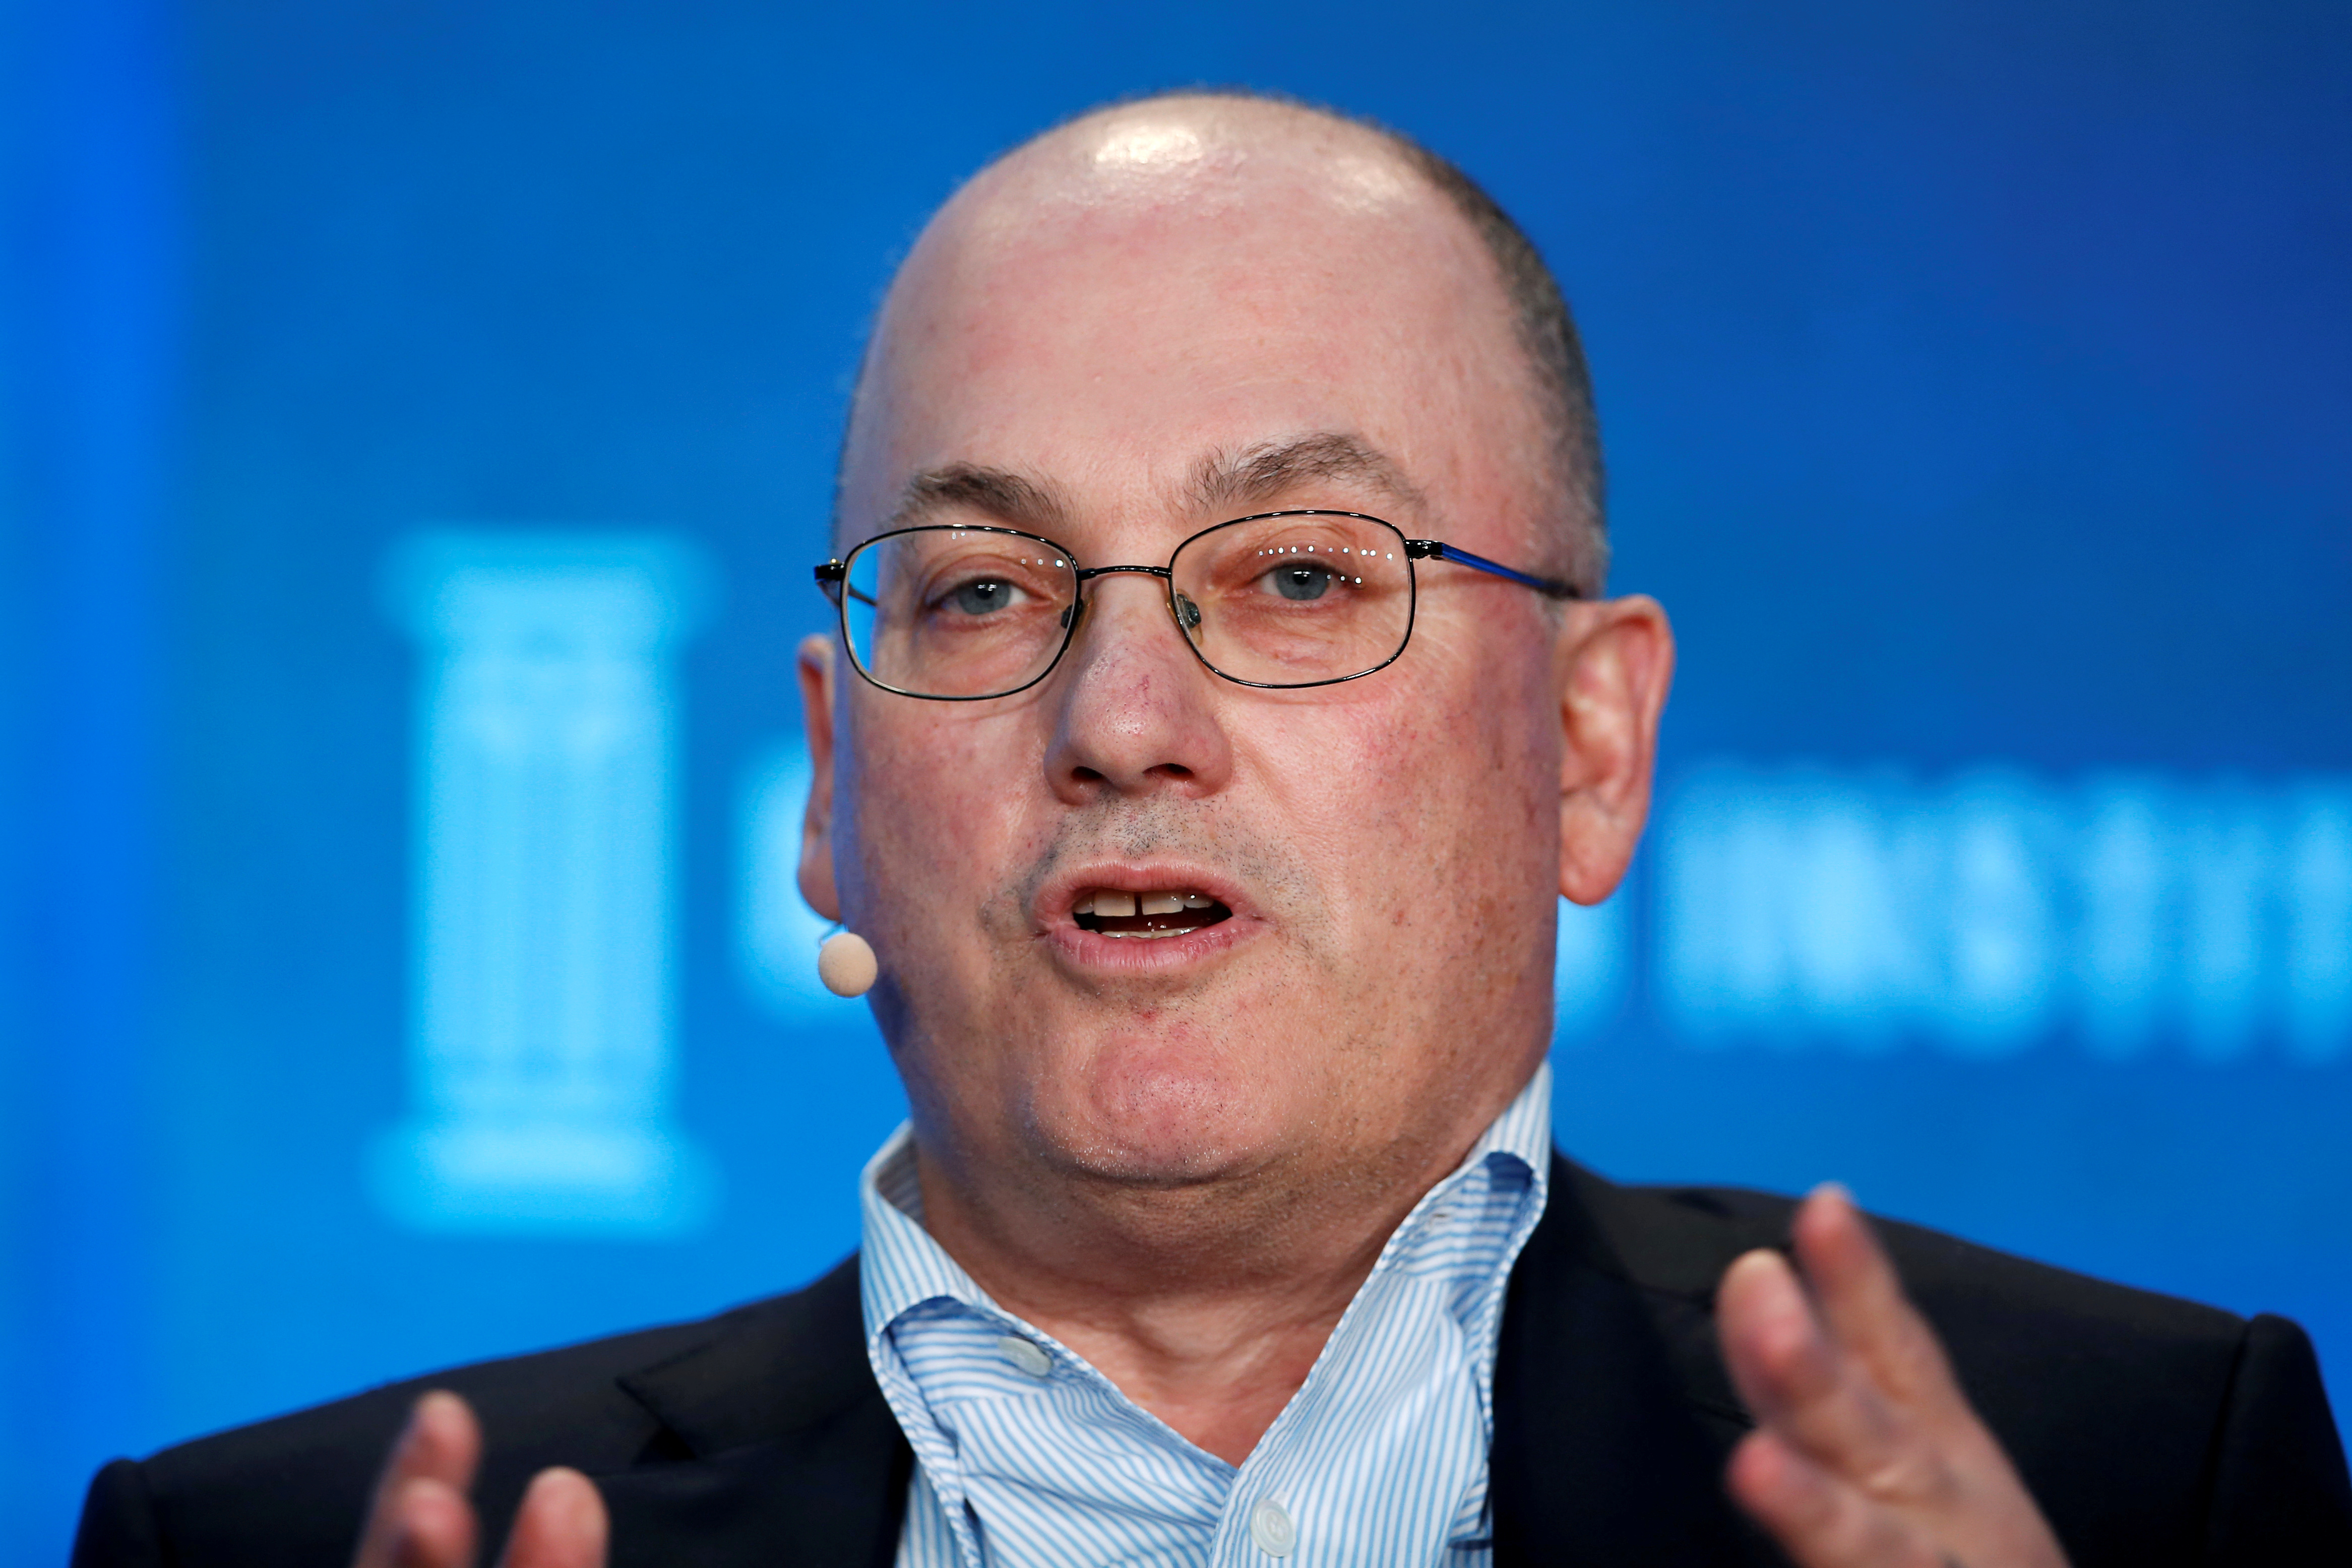 Steven Cohen, Chairman and CEO of Point72 Asset Management, speaks at the Milken Institute Global Conference in Beverly Hills, California, U.S., May 2, 2016. REUTERS/Lucy Nicholson